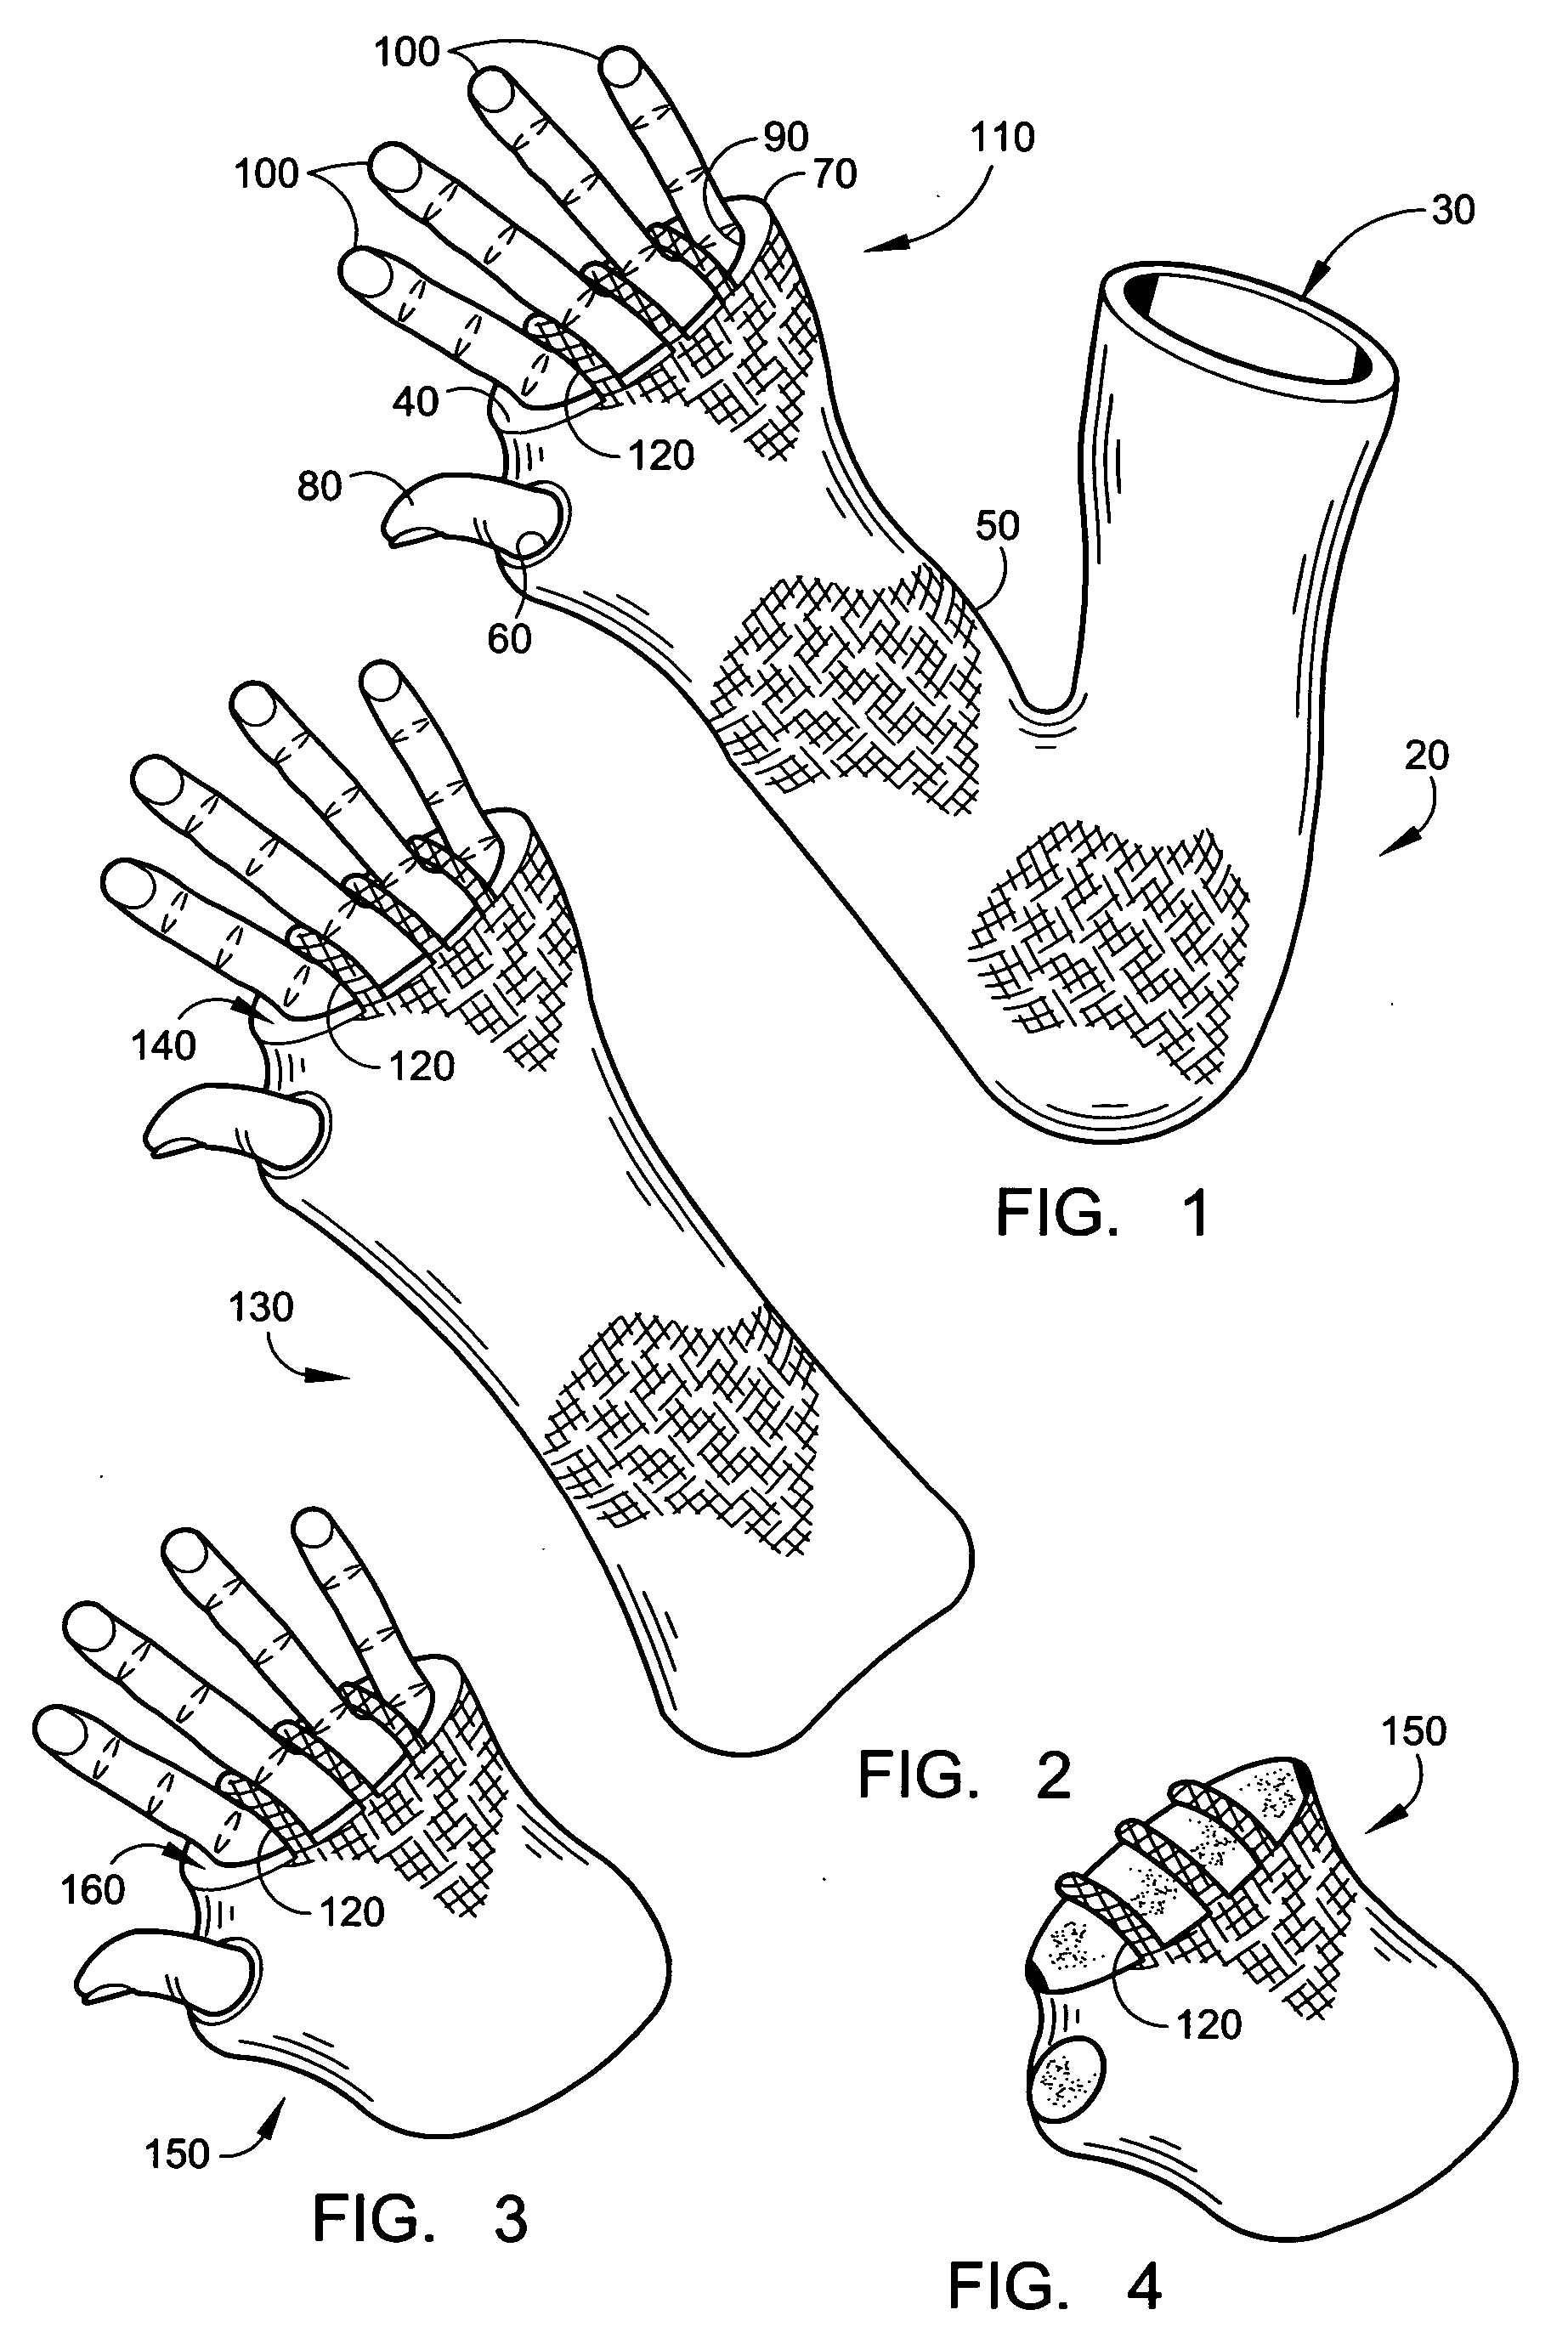 Cast cover and method of use